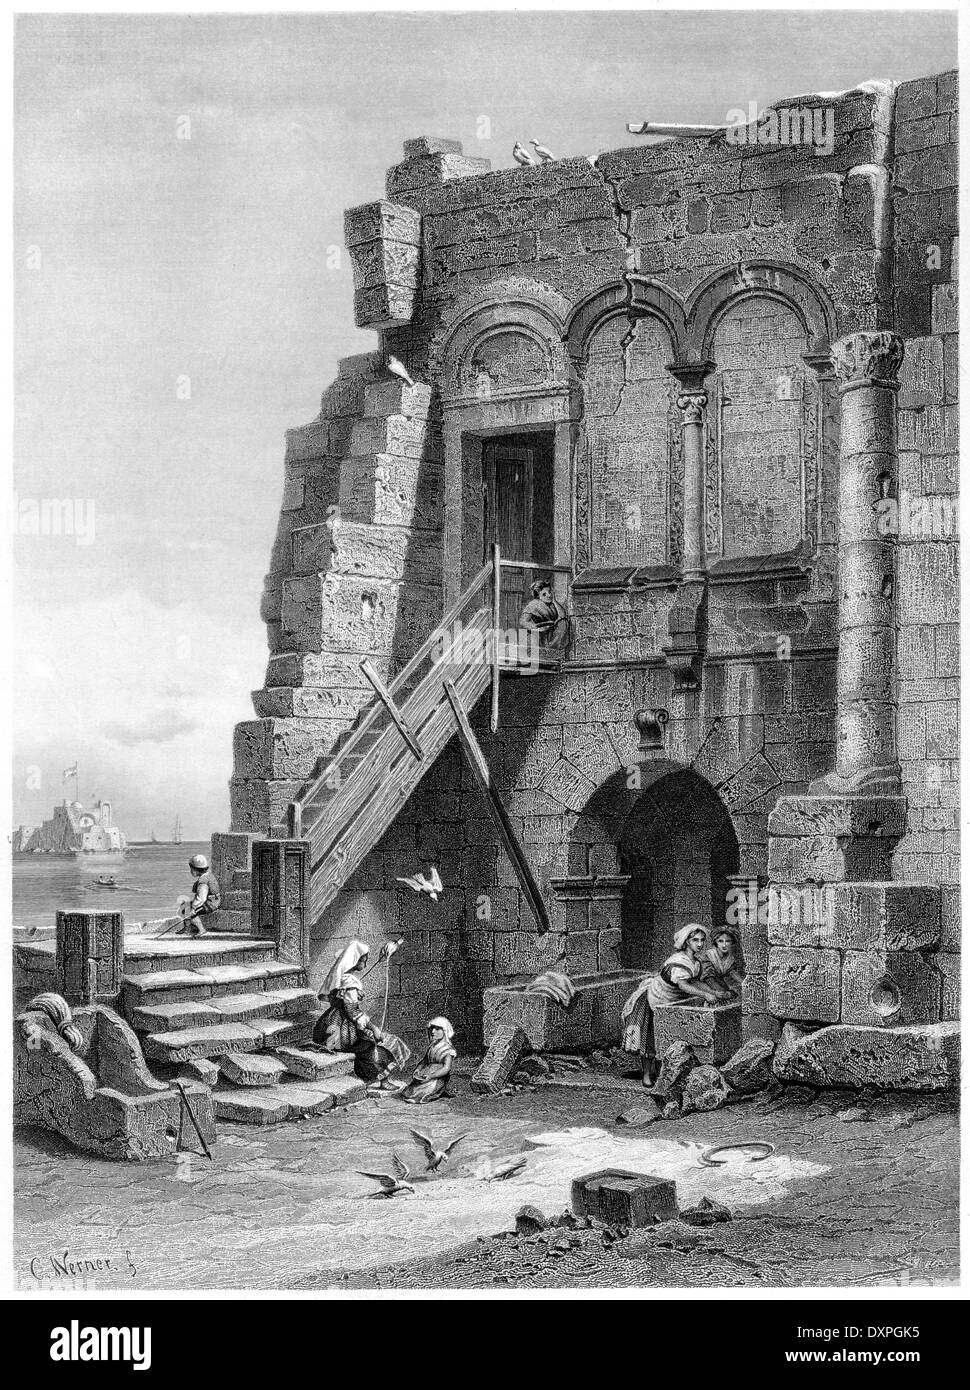 An engraving entitled 'Virgil's House, Brindisi' scanned at high resolution from a book published around 1878. Believed copyright free. Stock Photo